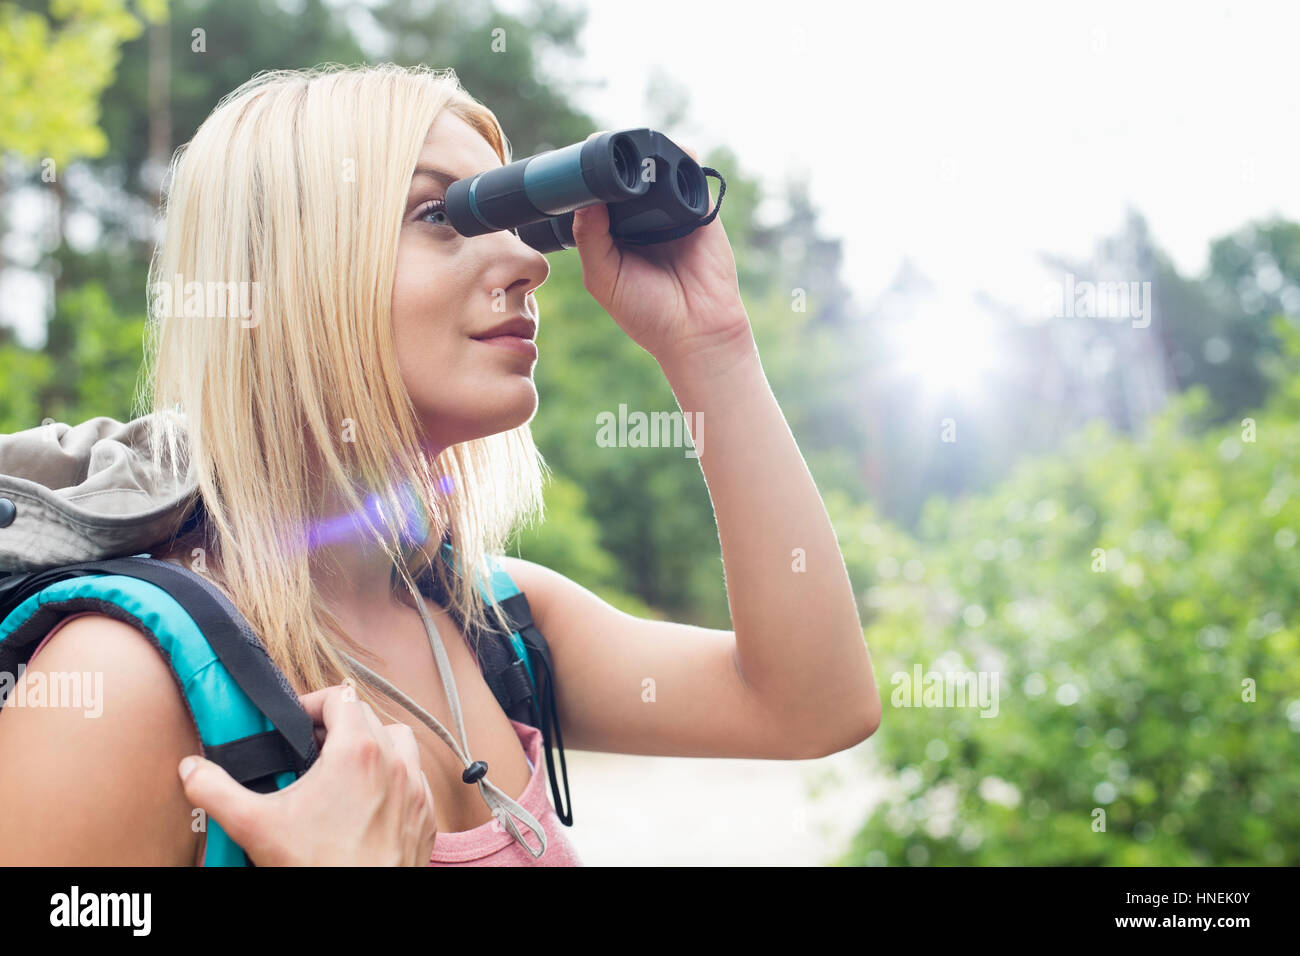 Young female hiker using binoculars in forest Stock Photo